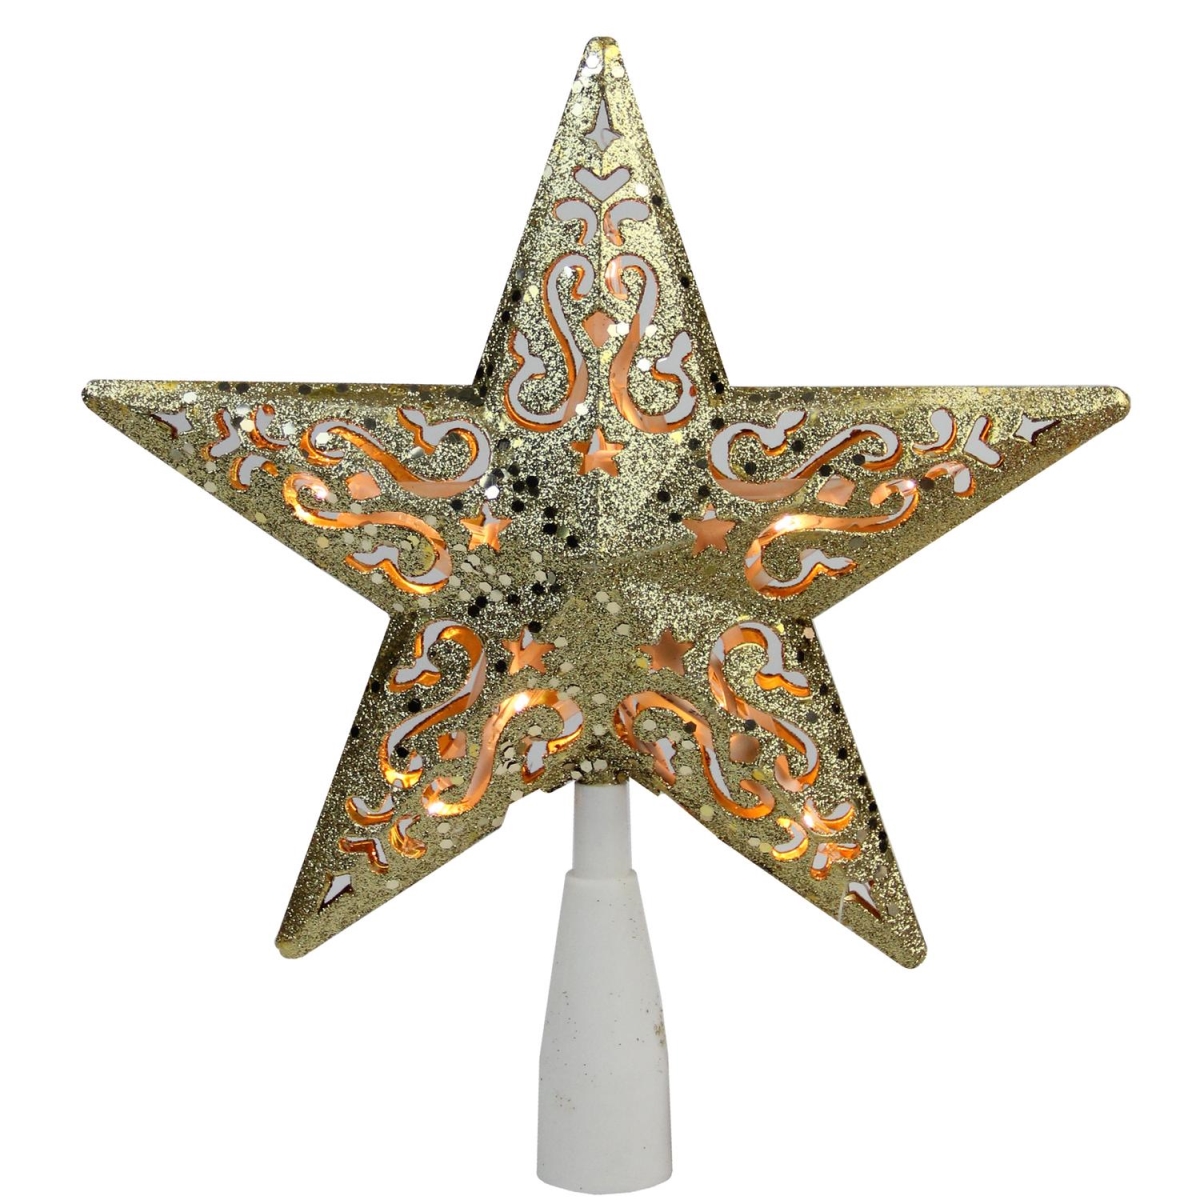 Picture of Northlight 32606349 8.5 in. Gold Glitter Star Cut-Out Design Christmas Tree Topper - Clear Lights